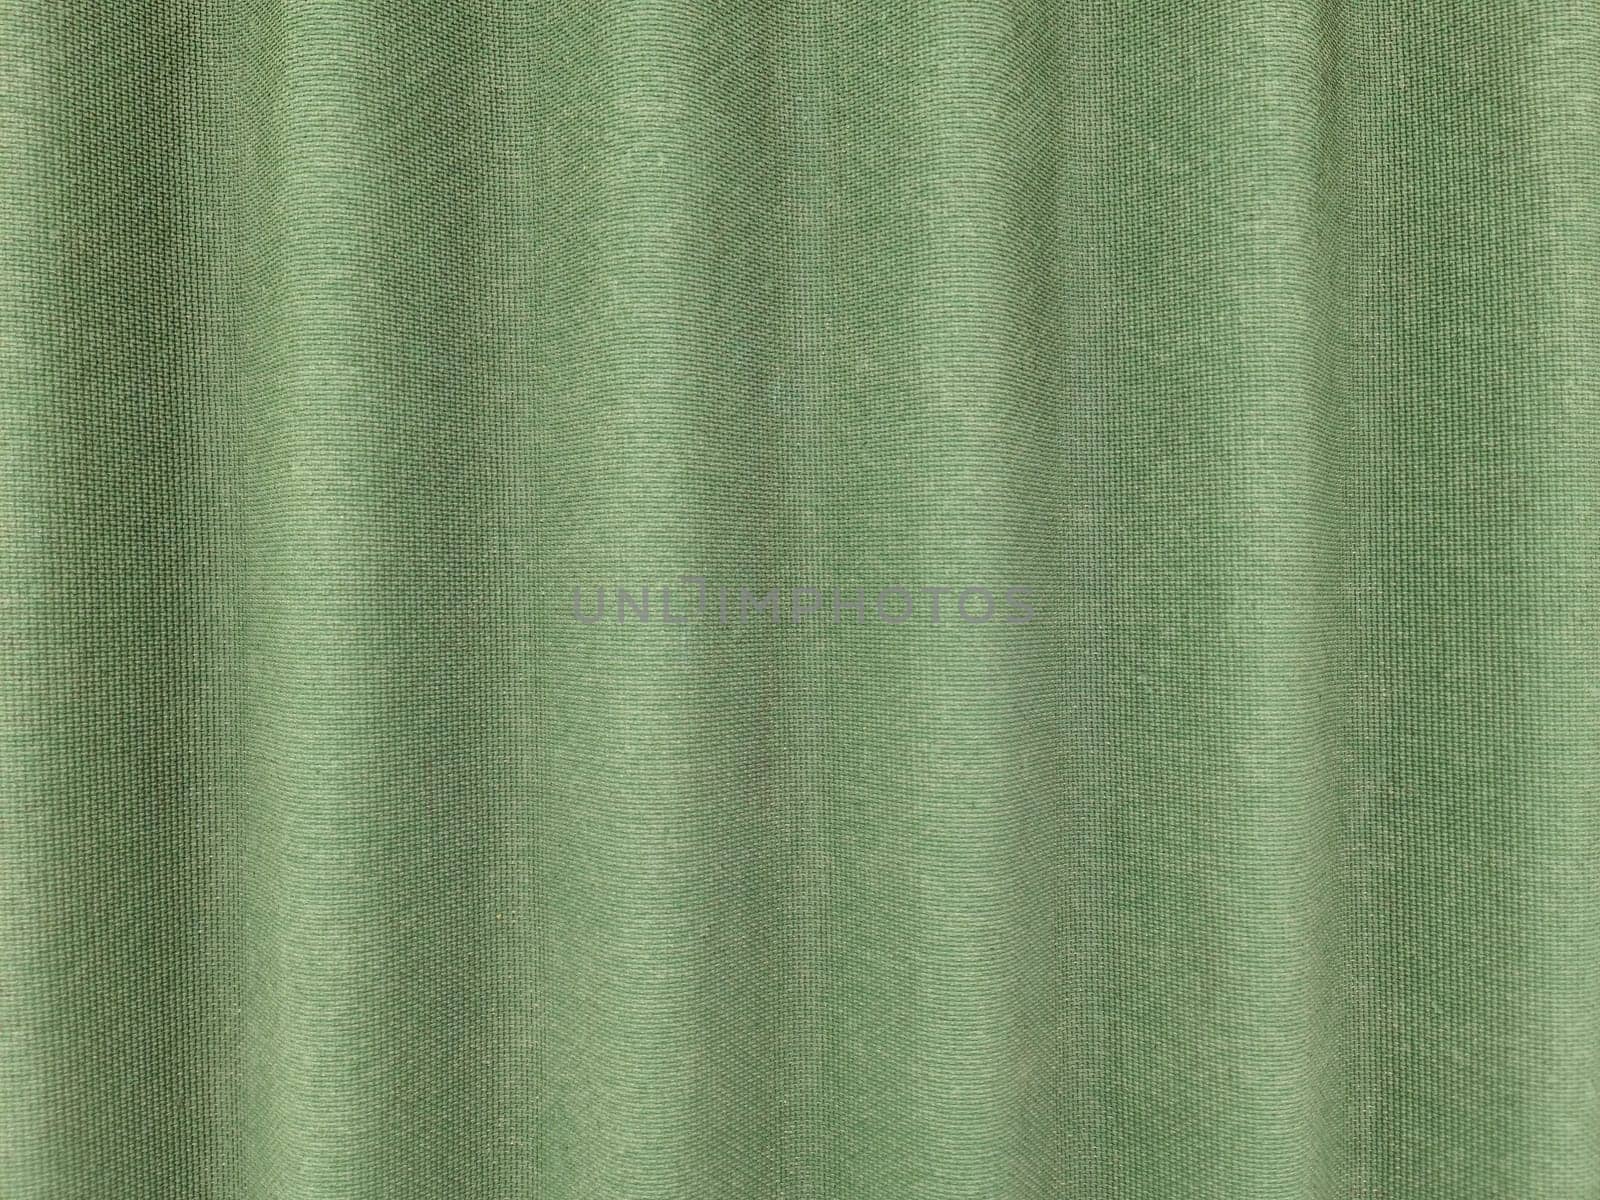 Background with green ondulin. Modern cheap roofing material, top view.